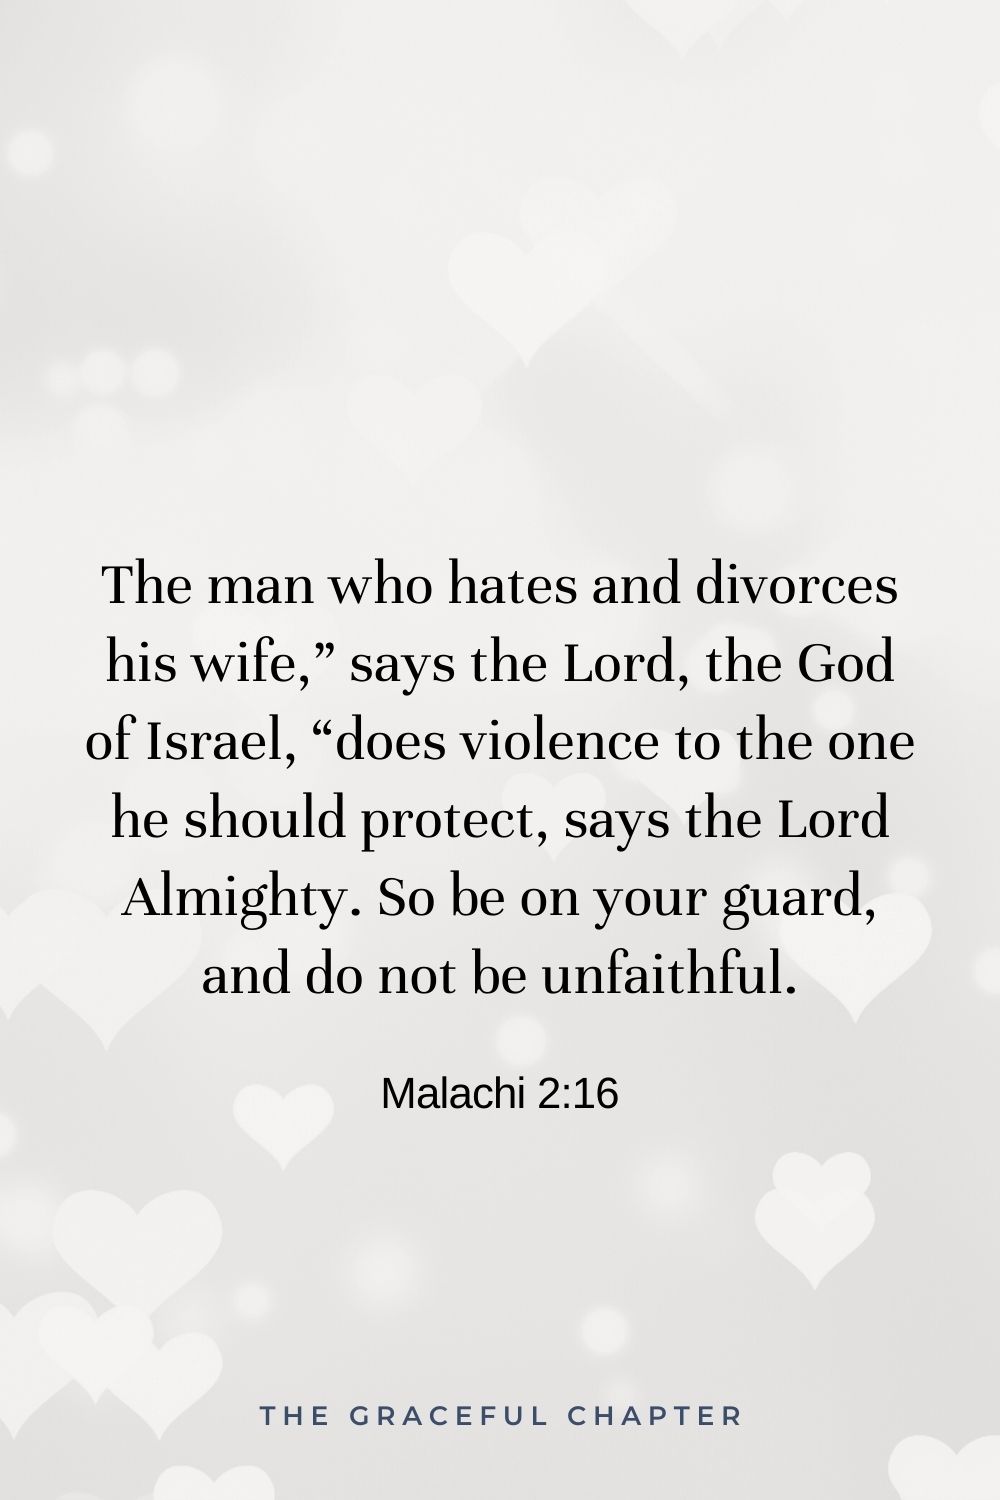 The man who hates and divorces his wife,” says the Lord, the God of Israel, “does violence to the one he should protect, says the Lord Almighty. So be on your guard, and do not be unfaithful. Malachi 2:16